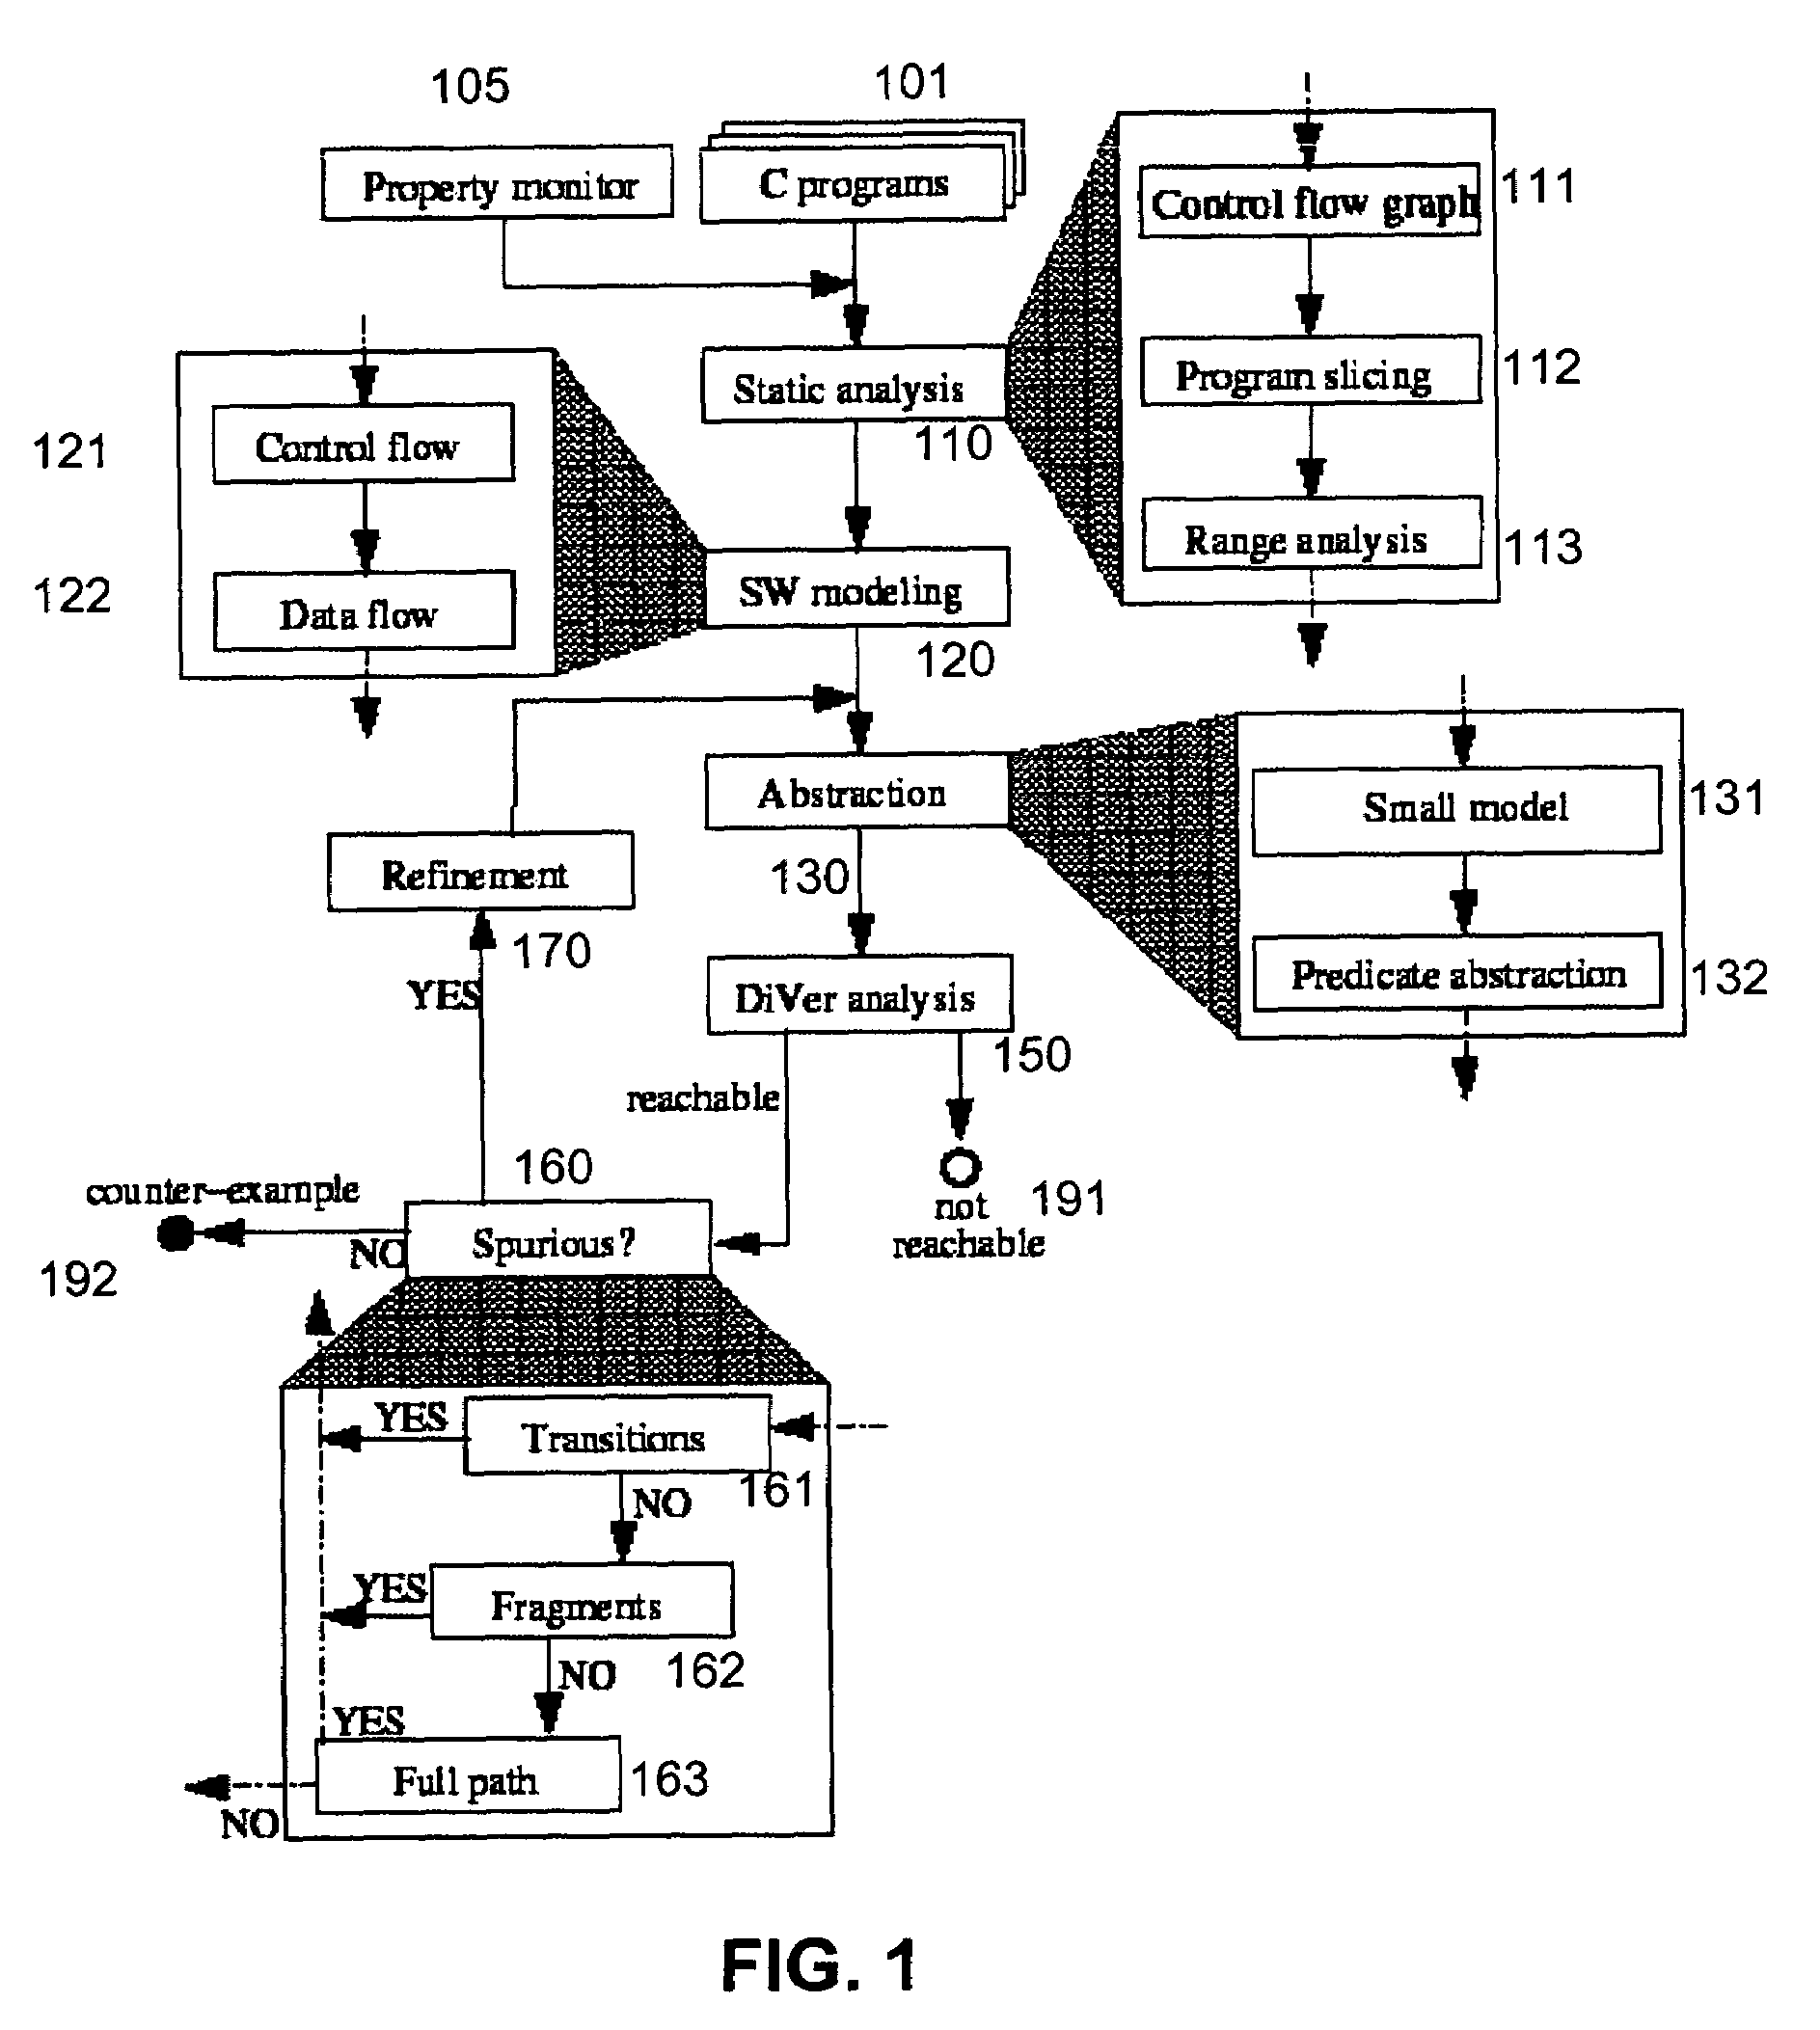 System and method for modeling, abstraction, and analysis of software